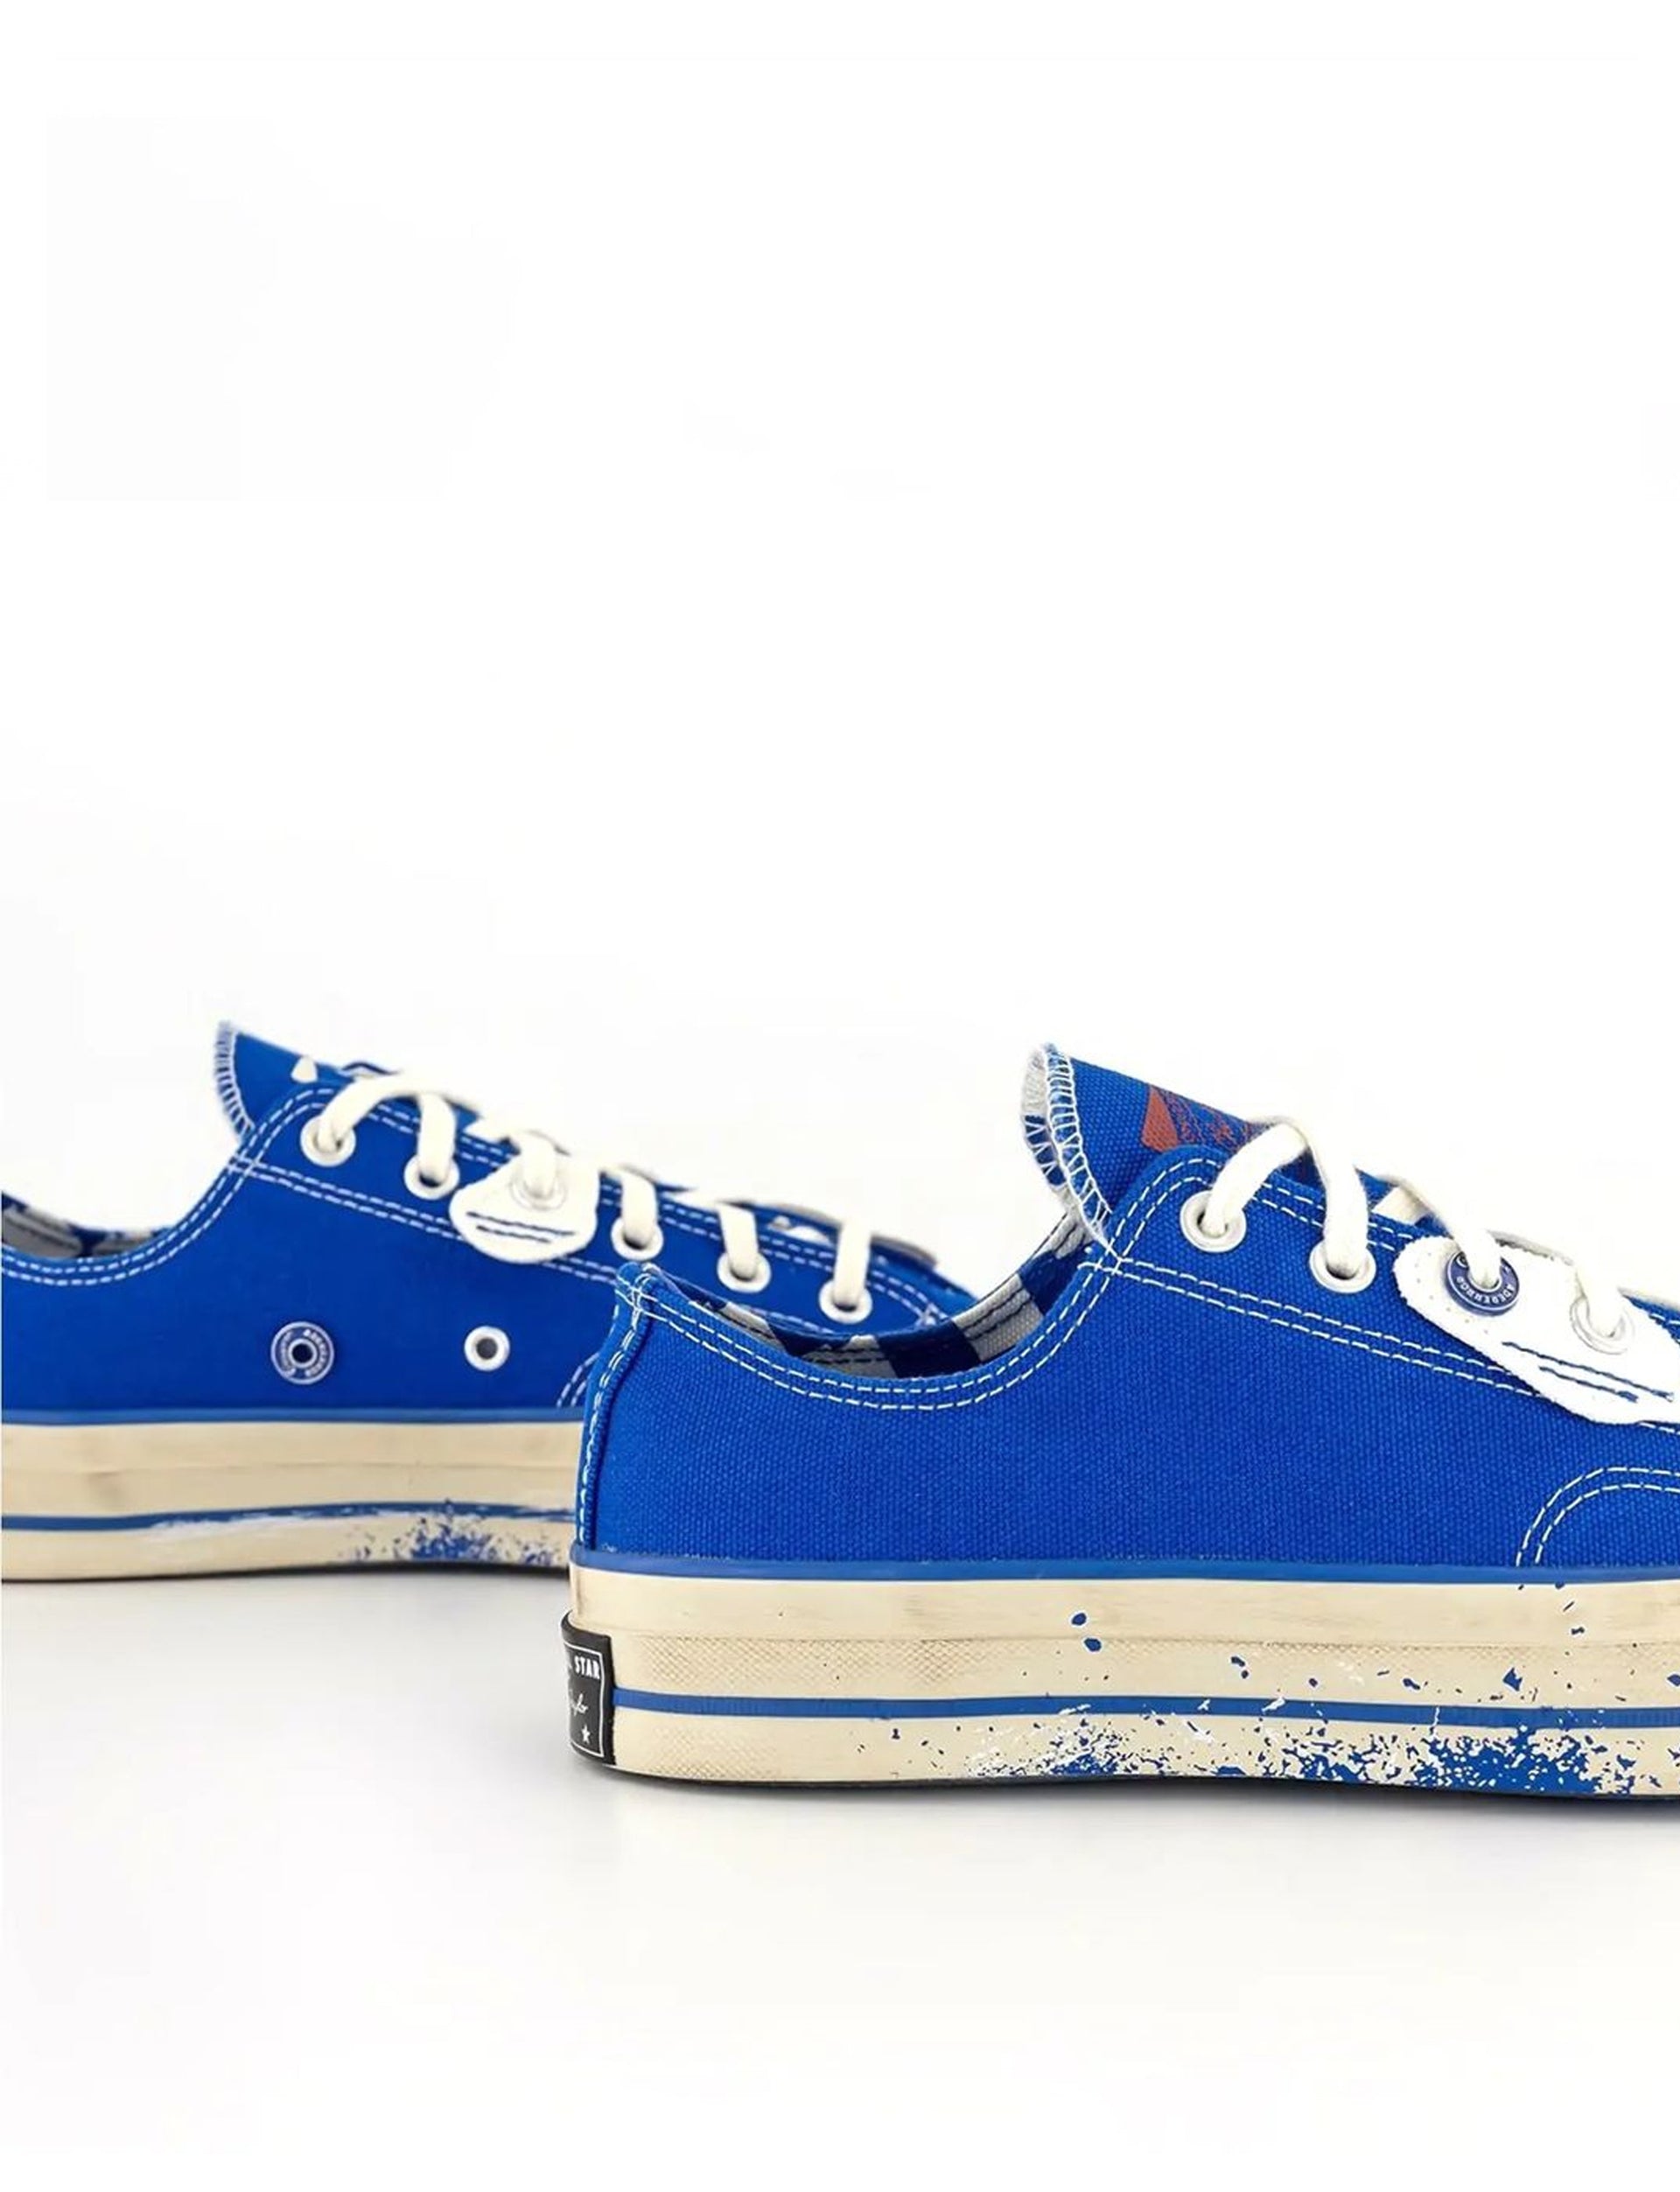 Ader Error x Converse All Star Low OX 70s Blue